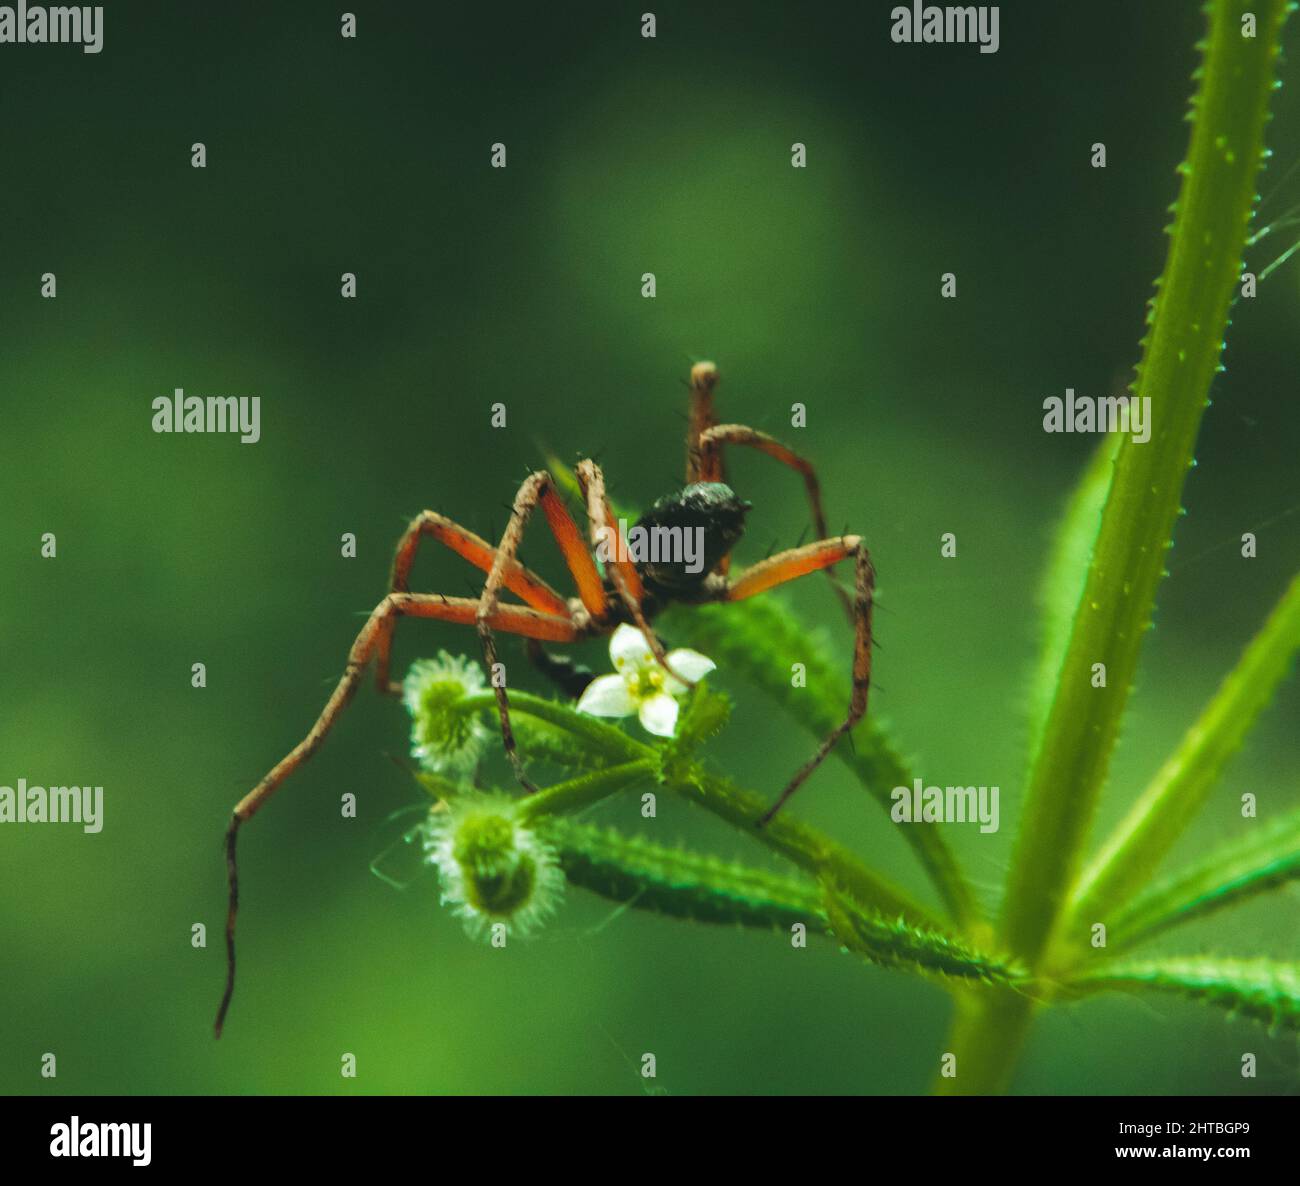 Spider on a plant on a blurred background Stock Photo